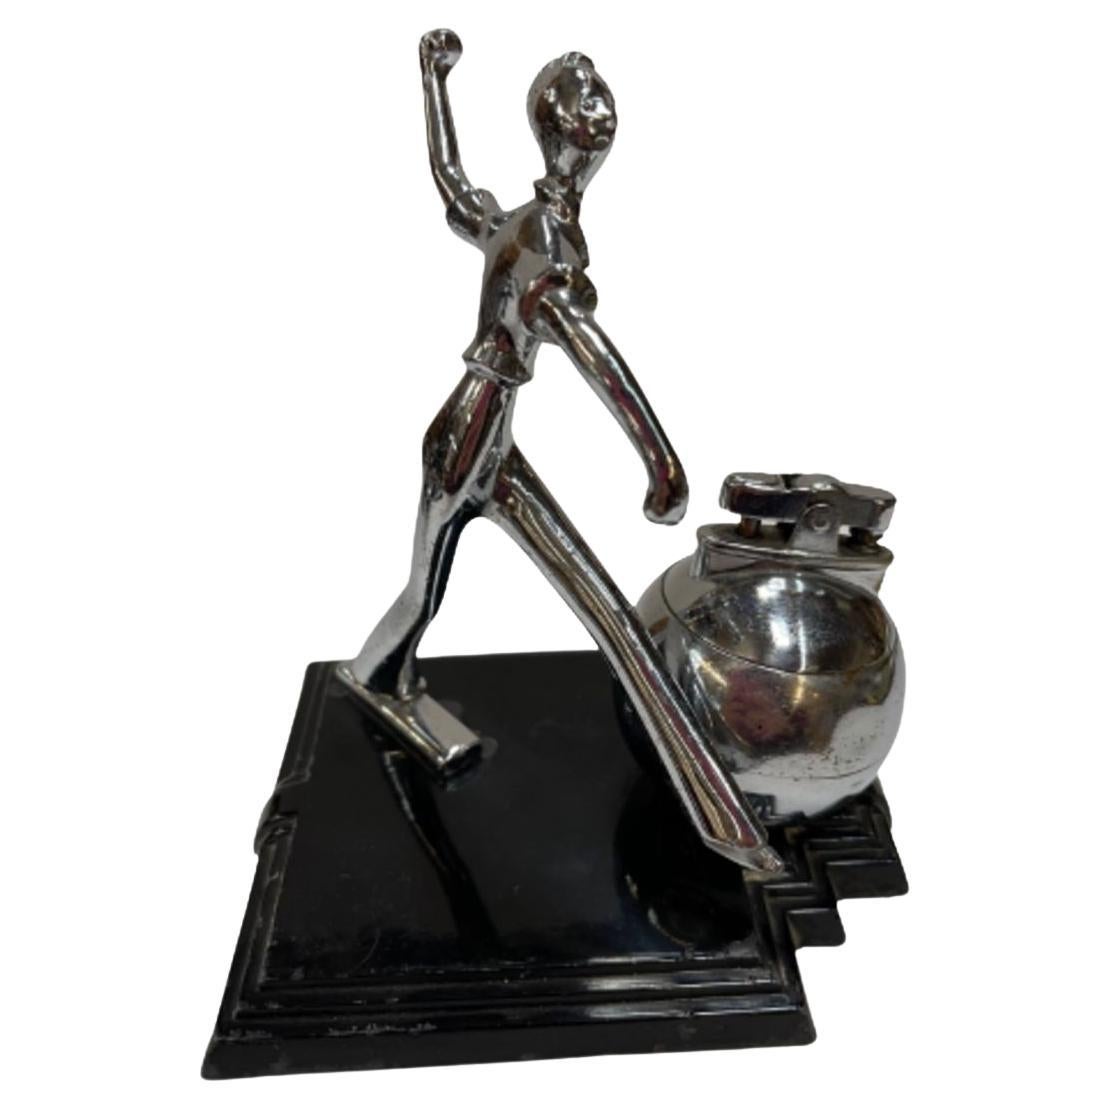 Art Deco Ball Player Table Table Lighter with Base by Ronson